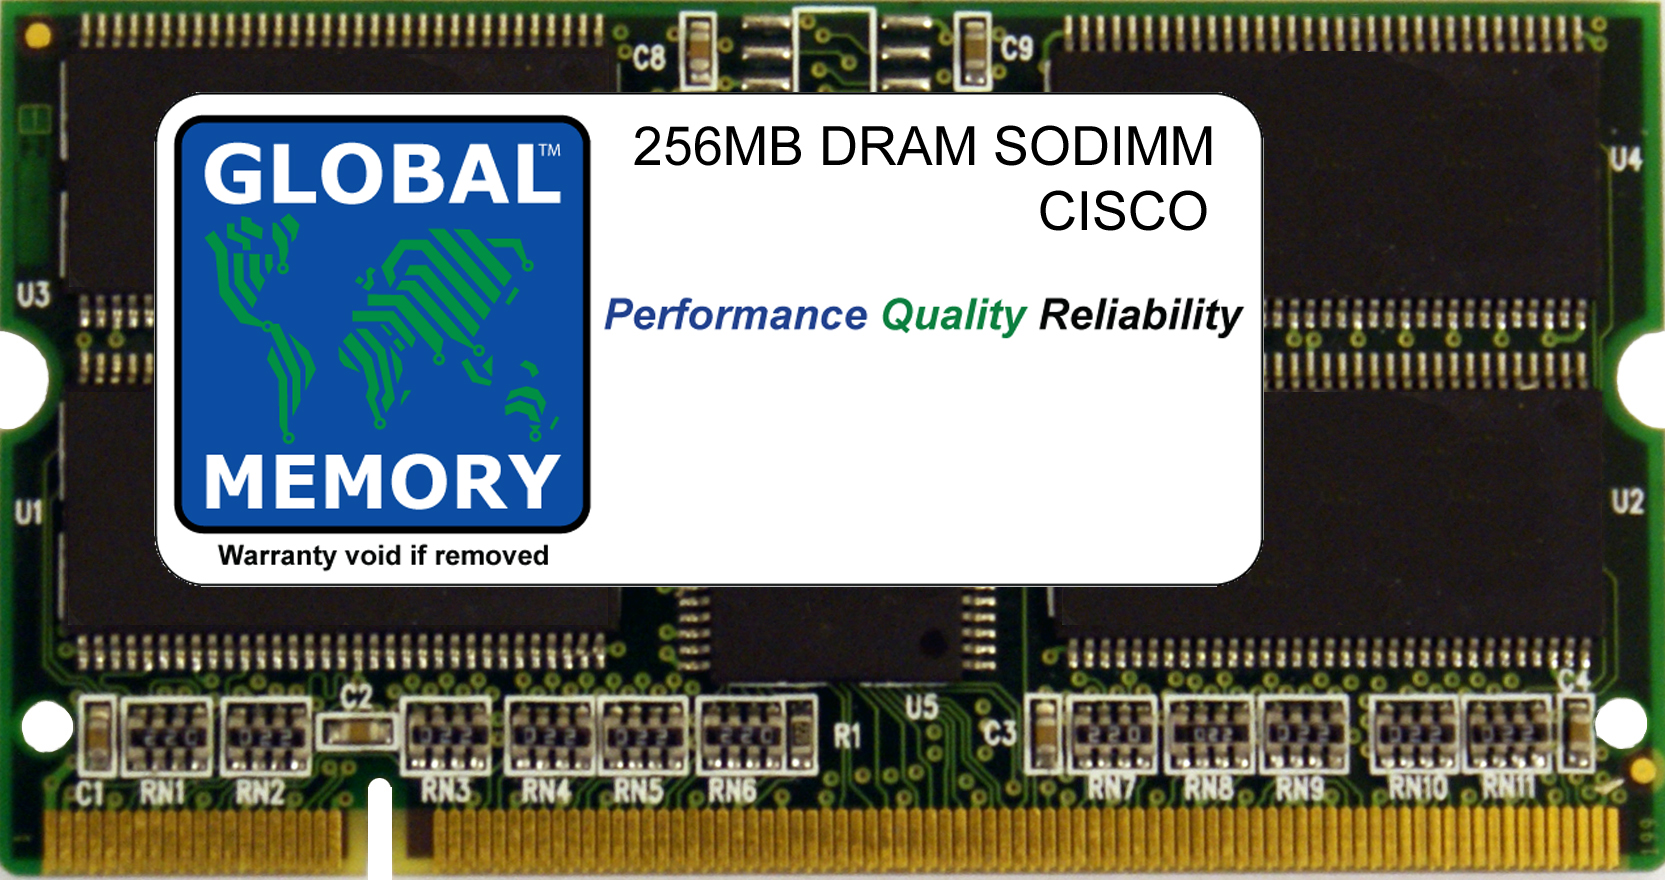 256MB DRAM SODIMM RAM FOR CISCO CATALYST 6500 SERIES SWITCHES DISTRIBUTED FORWARDING CARD 3A (MEM-XCEF720-256M)